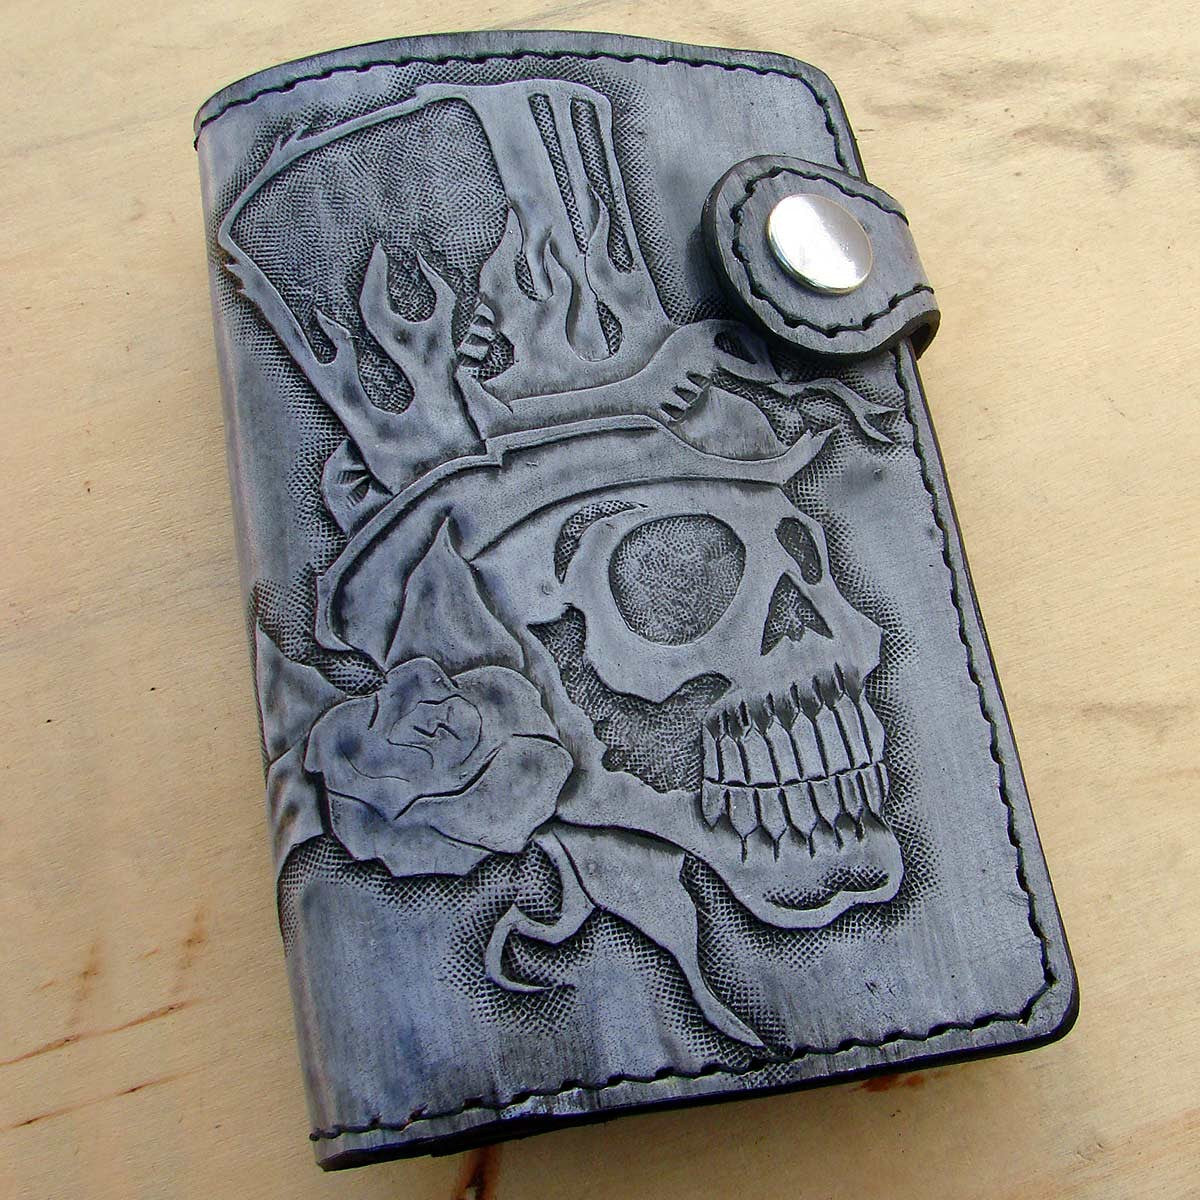 Bifold cow leather wallet biker style white  with skull by Another Way of LifeAnother Way of Life